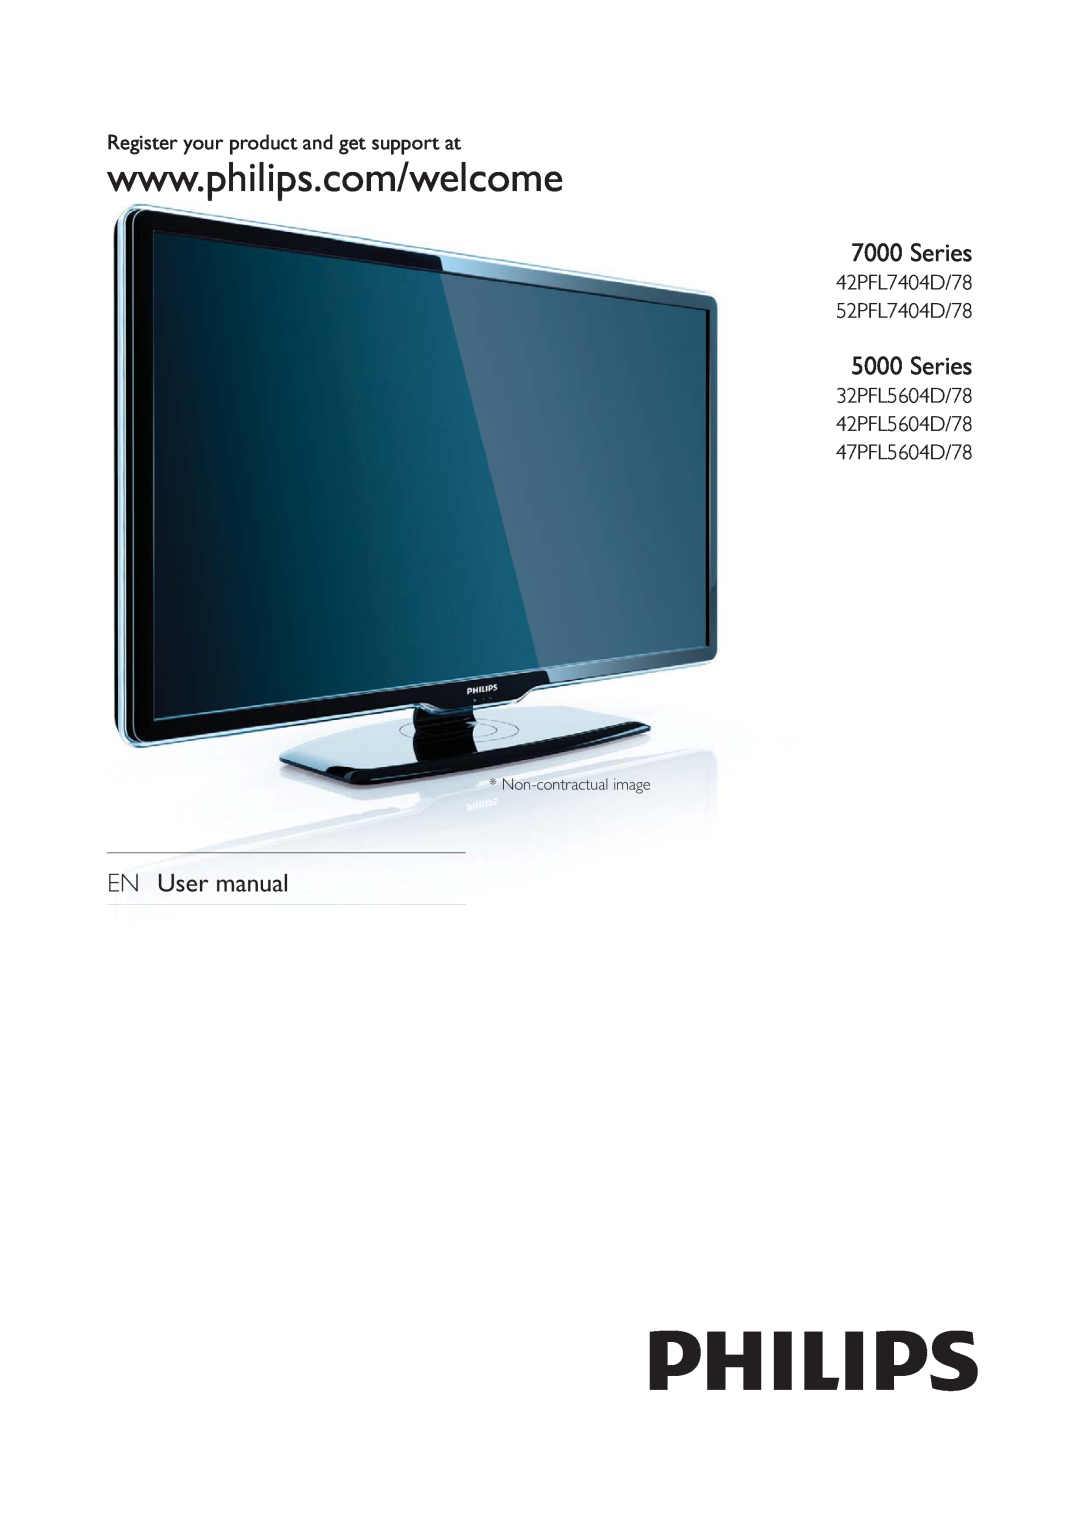 Philips 42PFL7404D/78 user manual Series, EN User manual, Register your product and get support at, Non-contractual image 